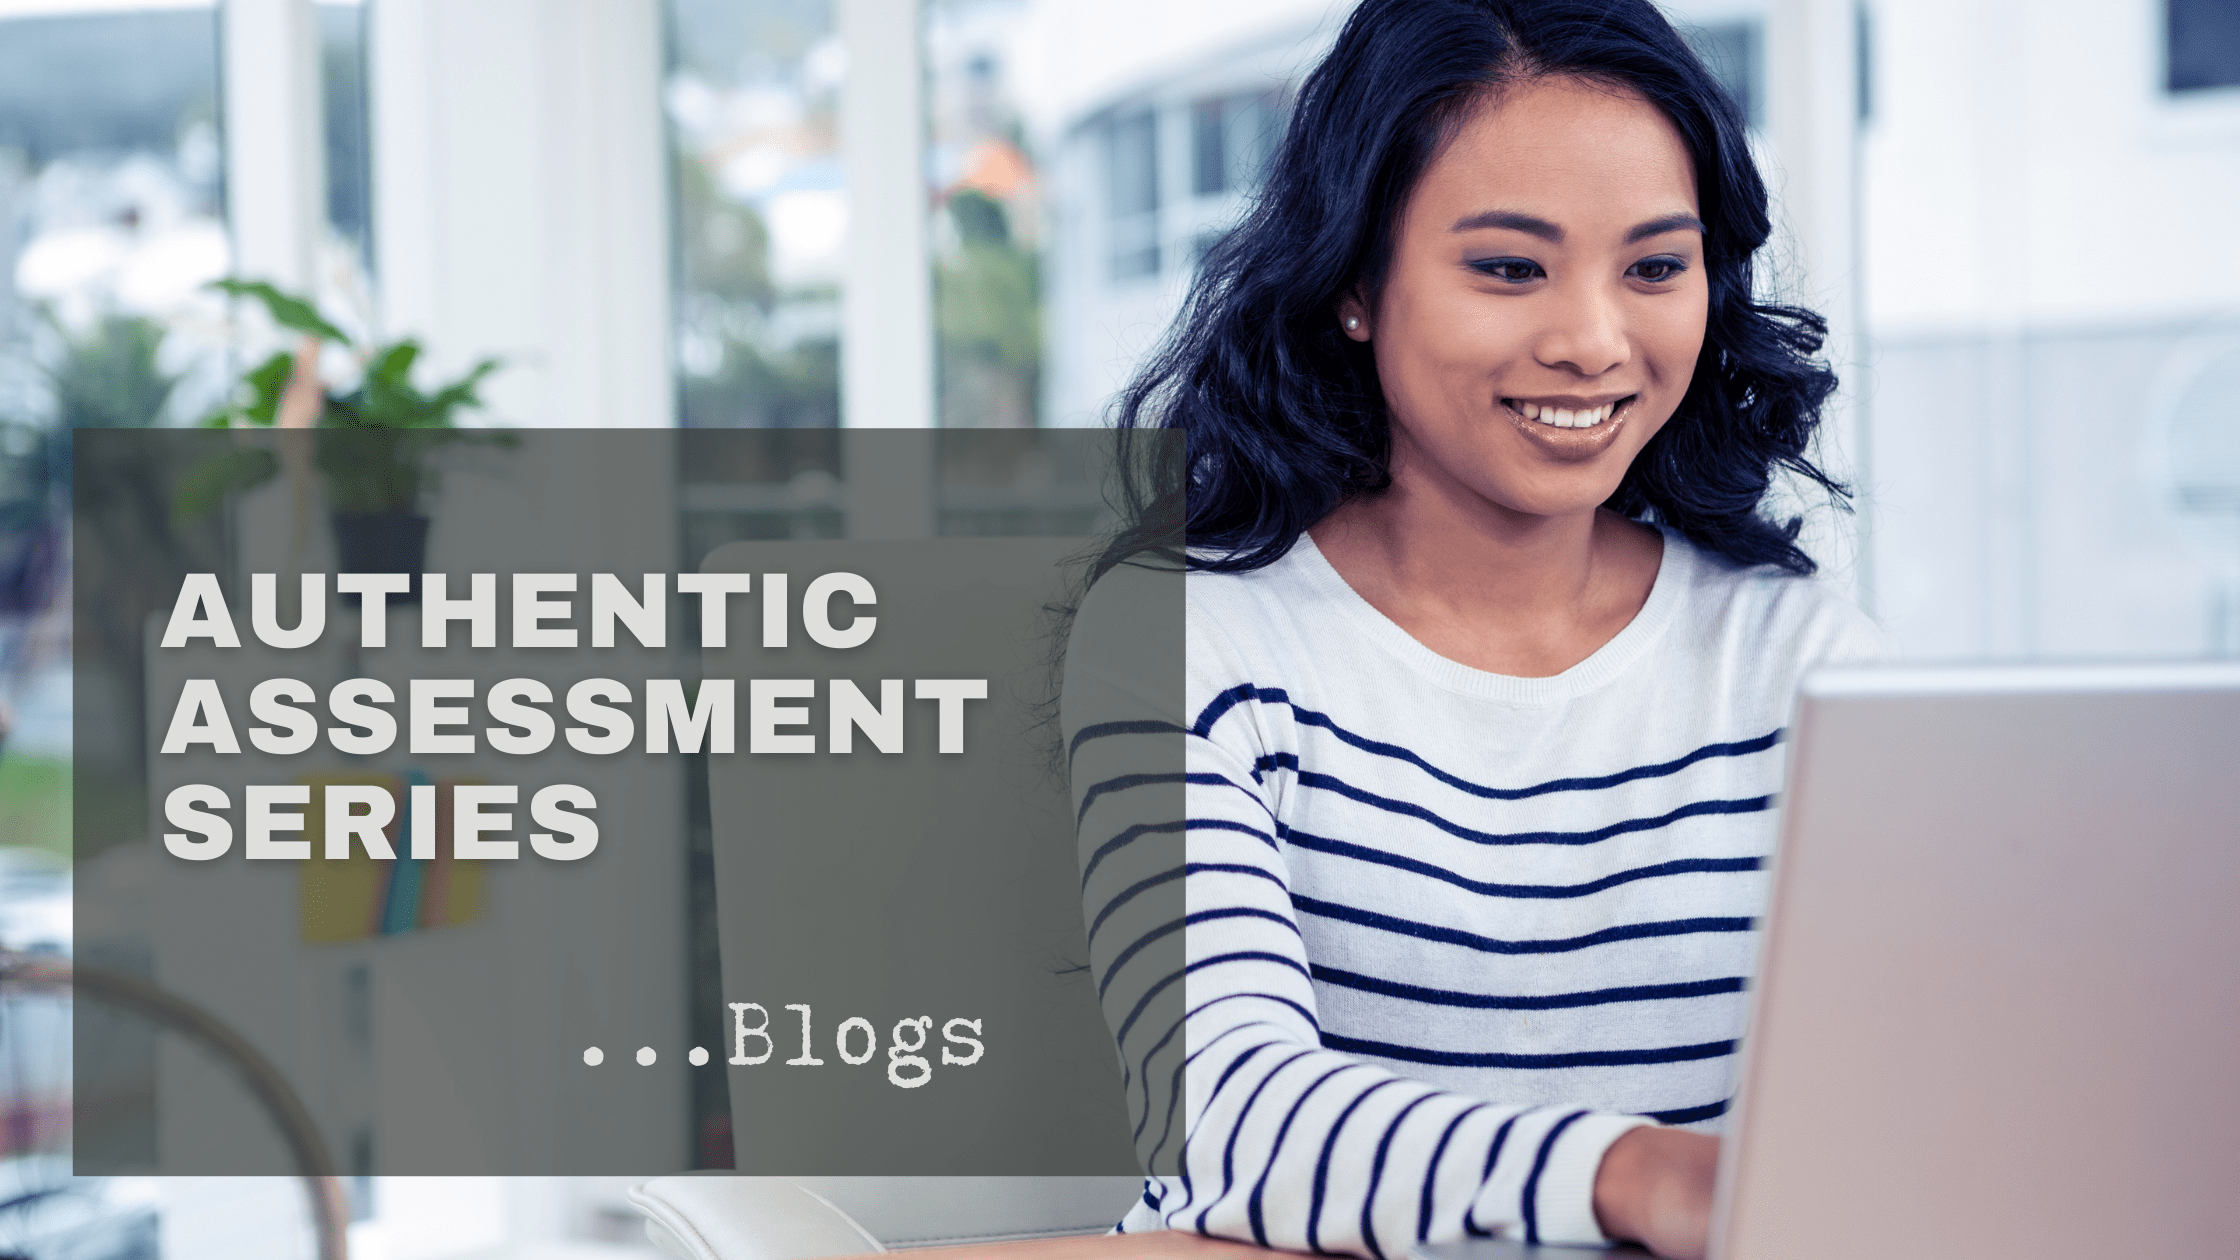 woman of color smiling and typing on laptop, text overlay reads Authentic Assessment Series...Blogs